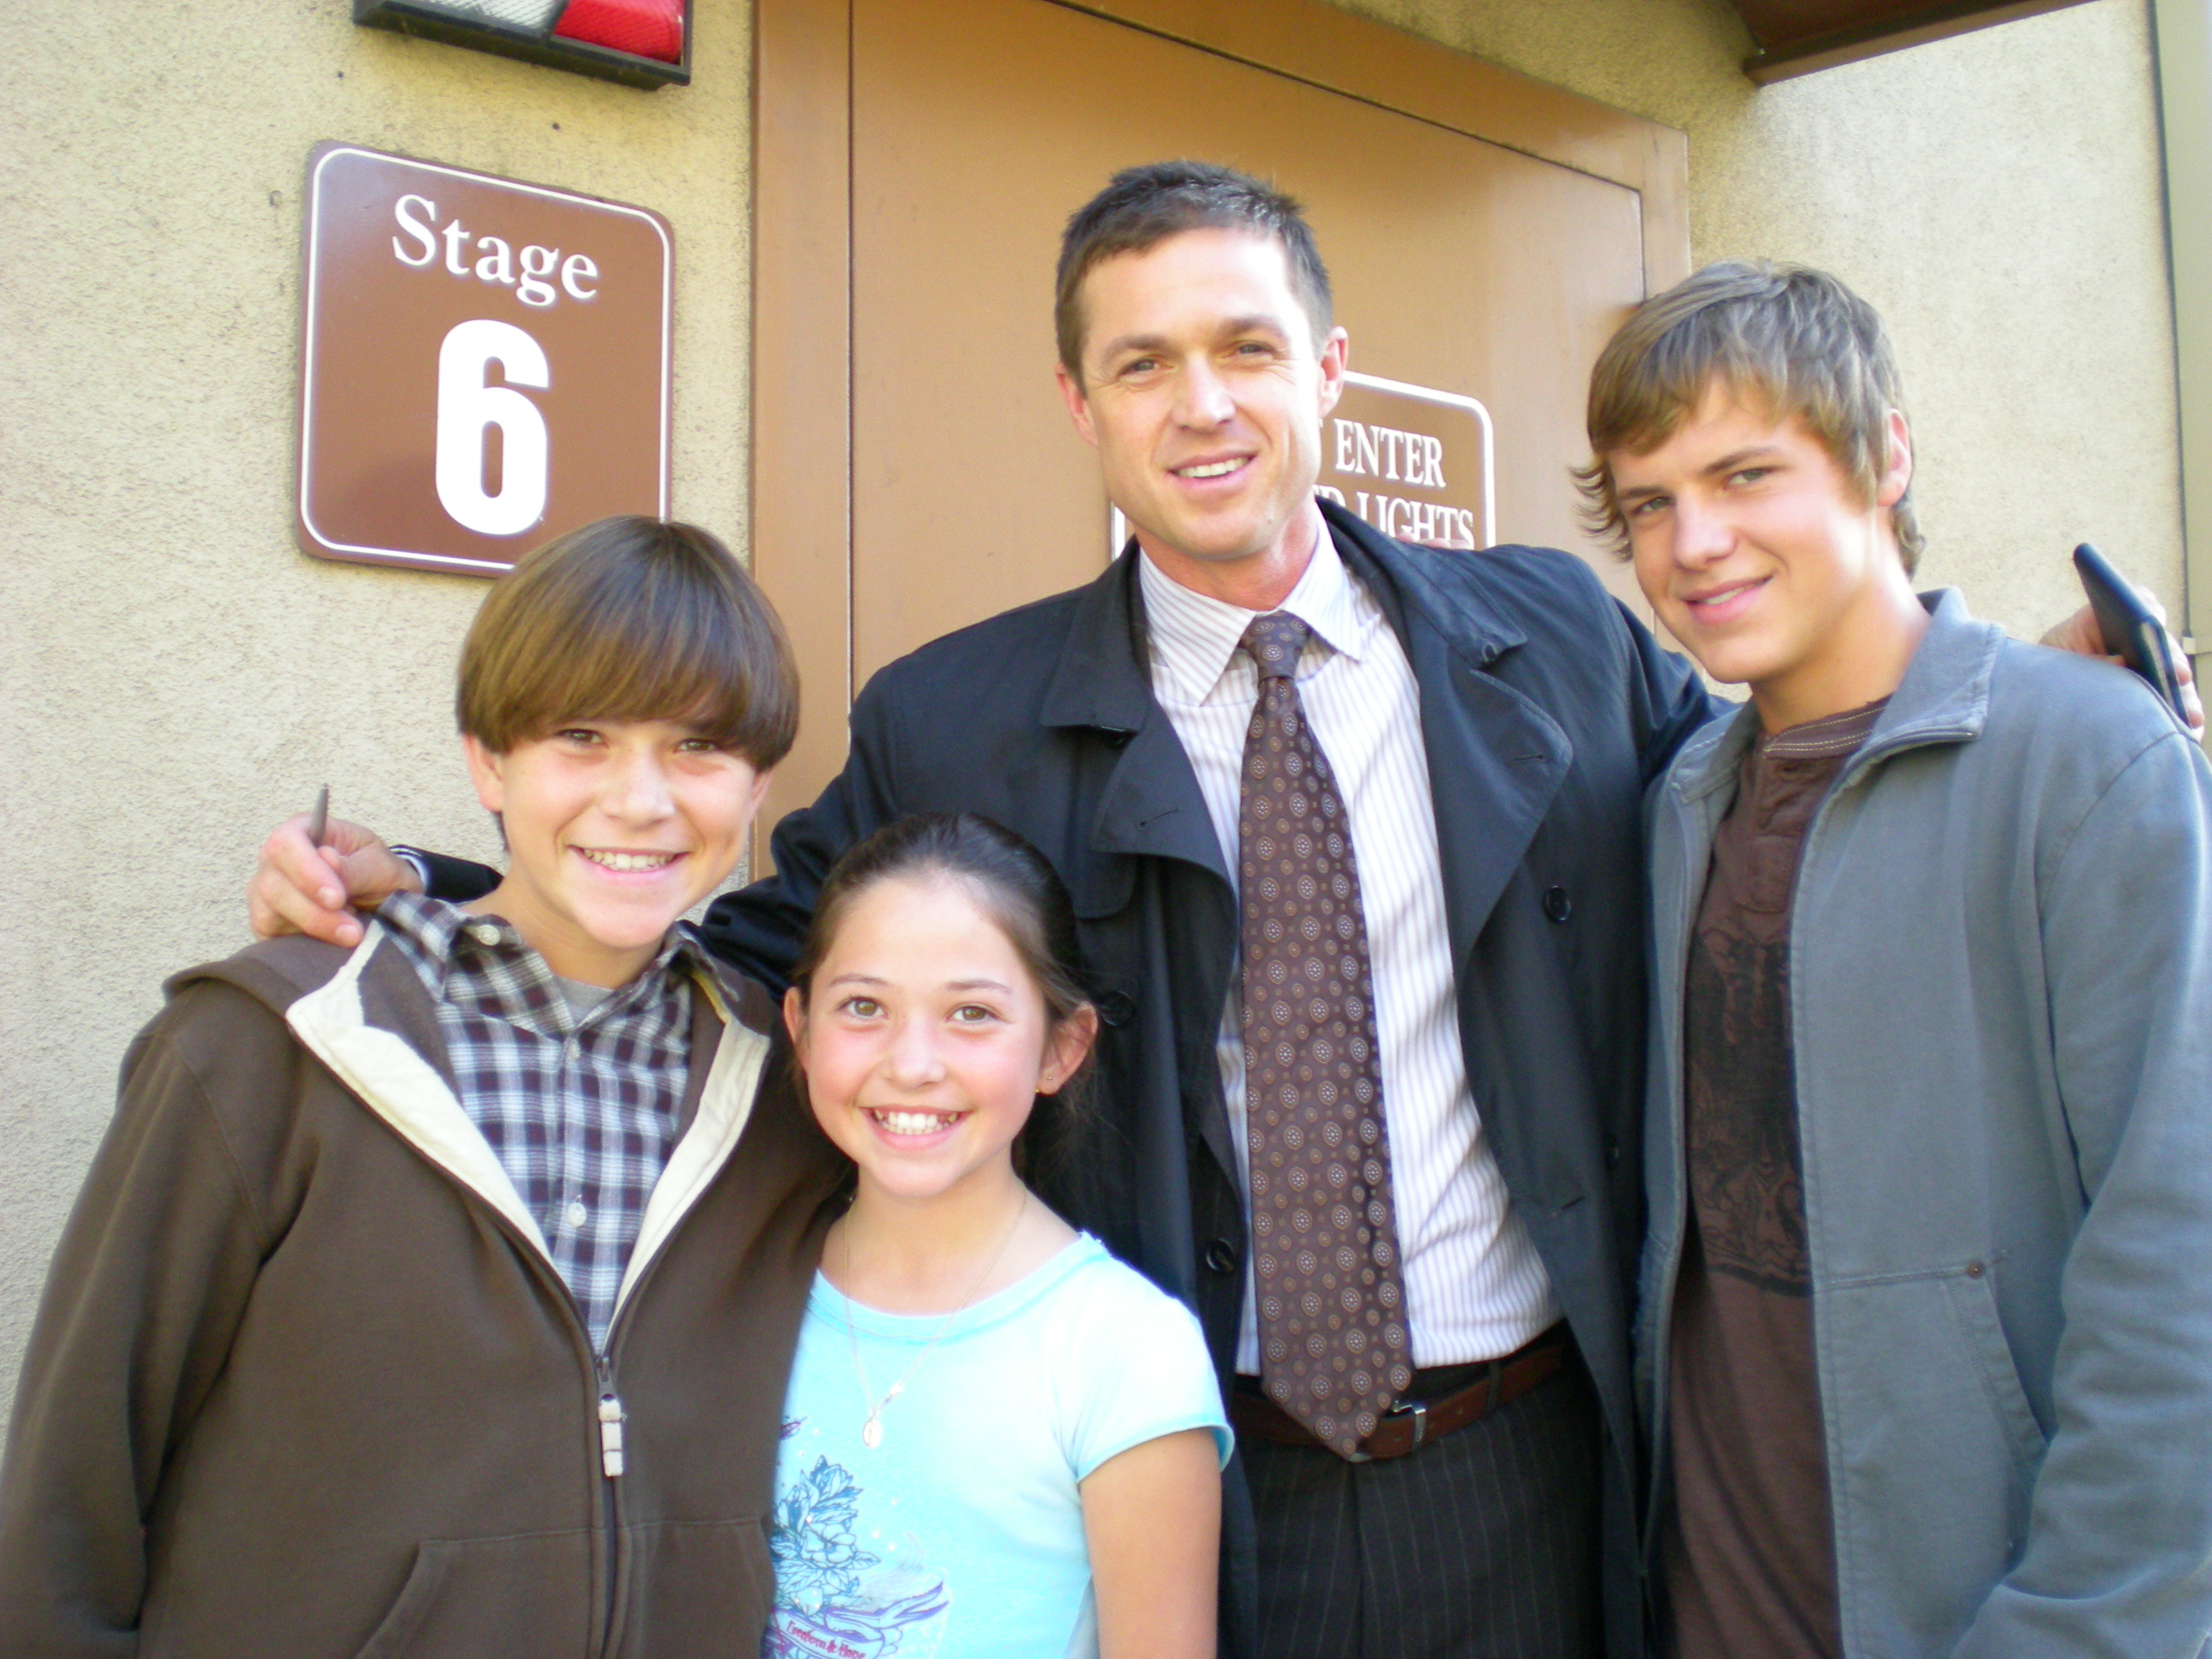 Wyatt & Chelsea Smith, Eric Close, Kevin Schmidt. Without A Trace, 2007.